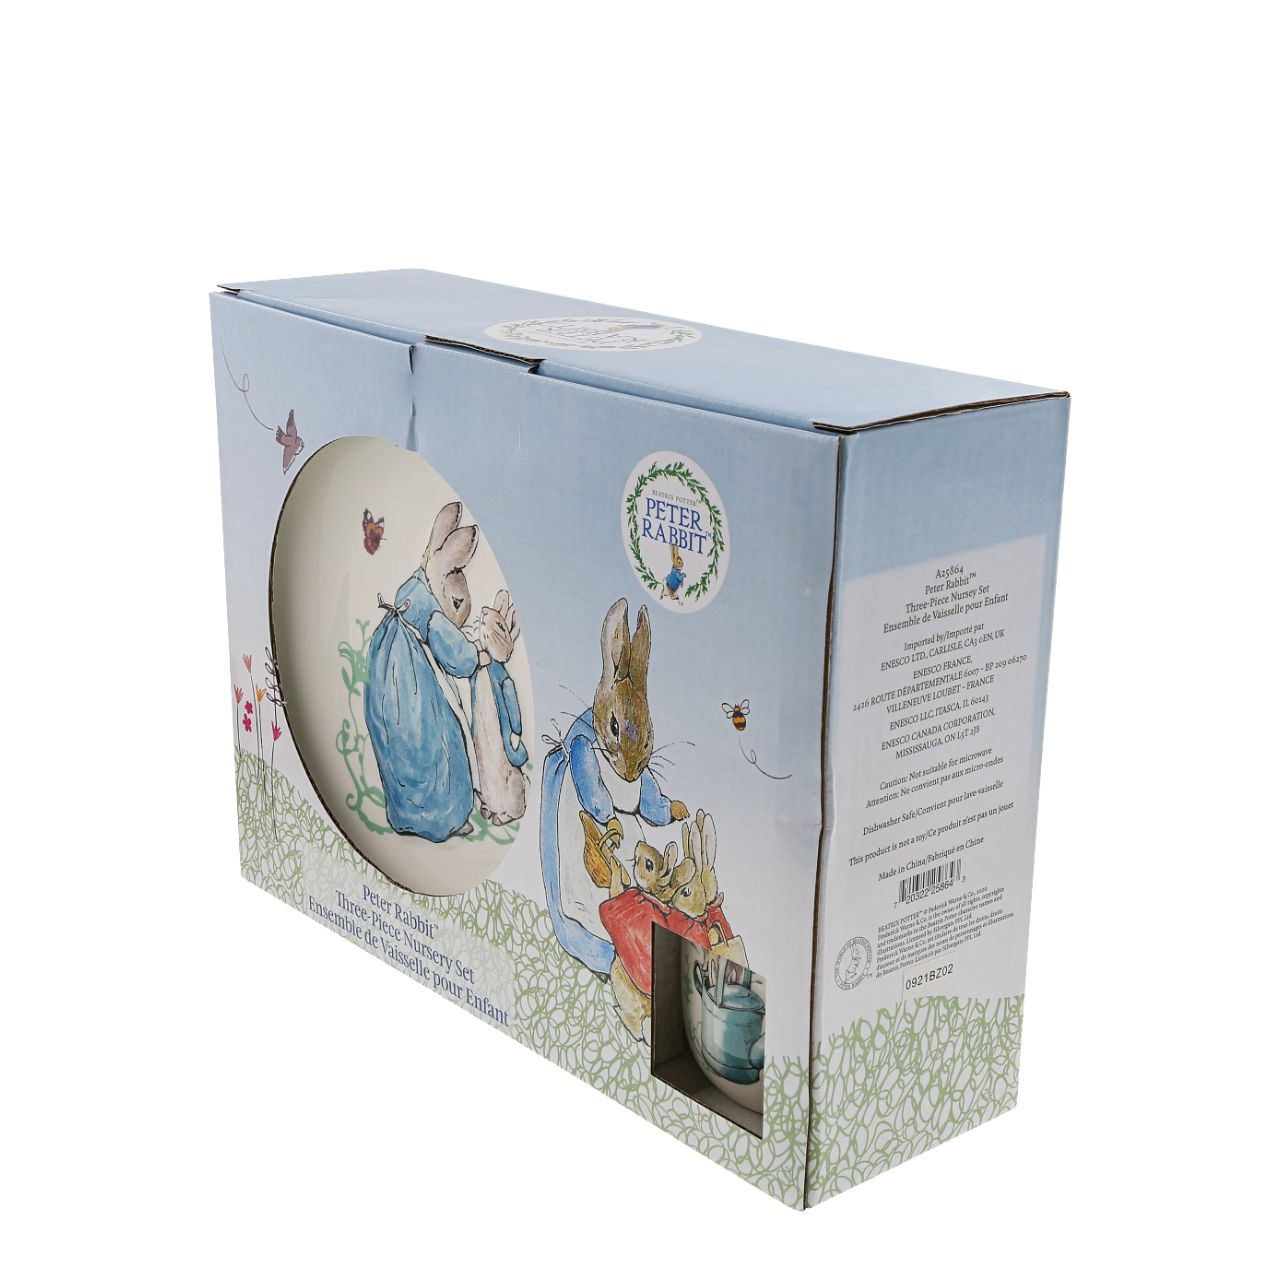 Beatrix Potter Peter Rabbit Three-Piece Nursery Set  This beautiful Peter Rabbit three-piece nursery set would make perfect for christening gifts, gifts for children or even a lovely birthday gift for a small child. Parents will be over the moon with such a unique gift.